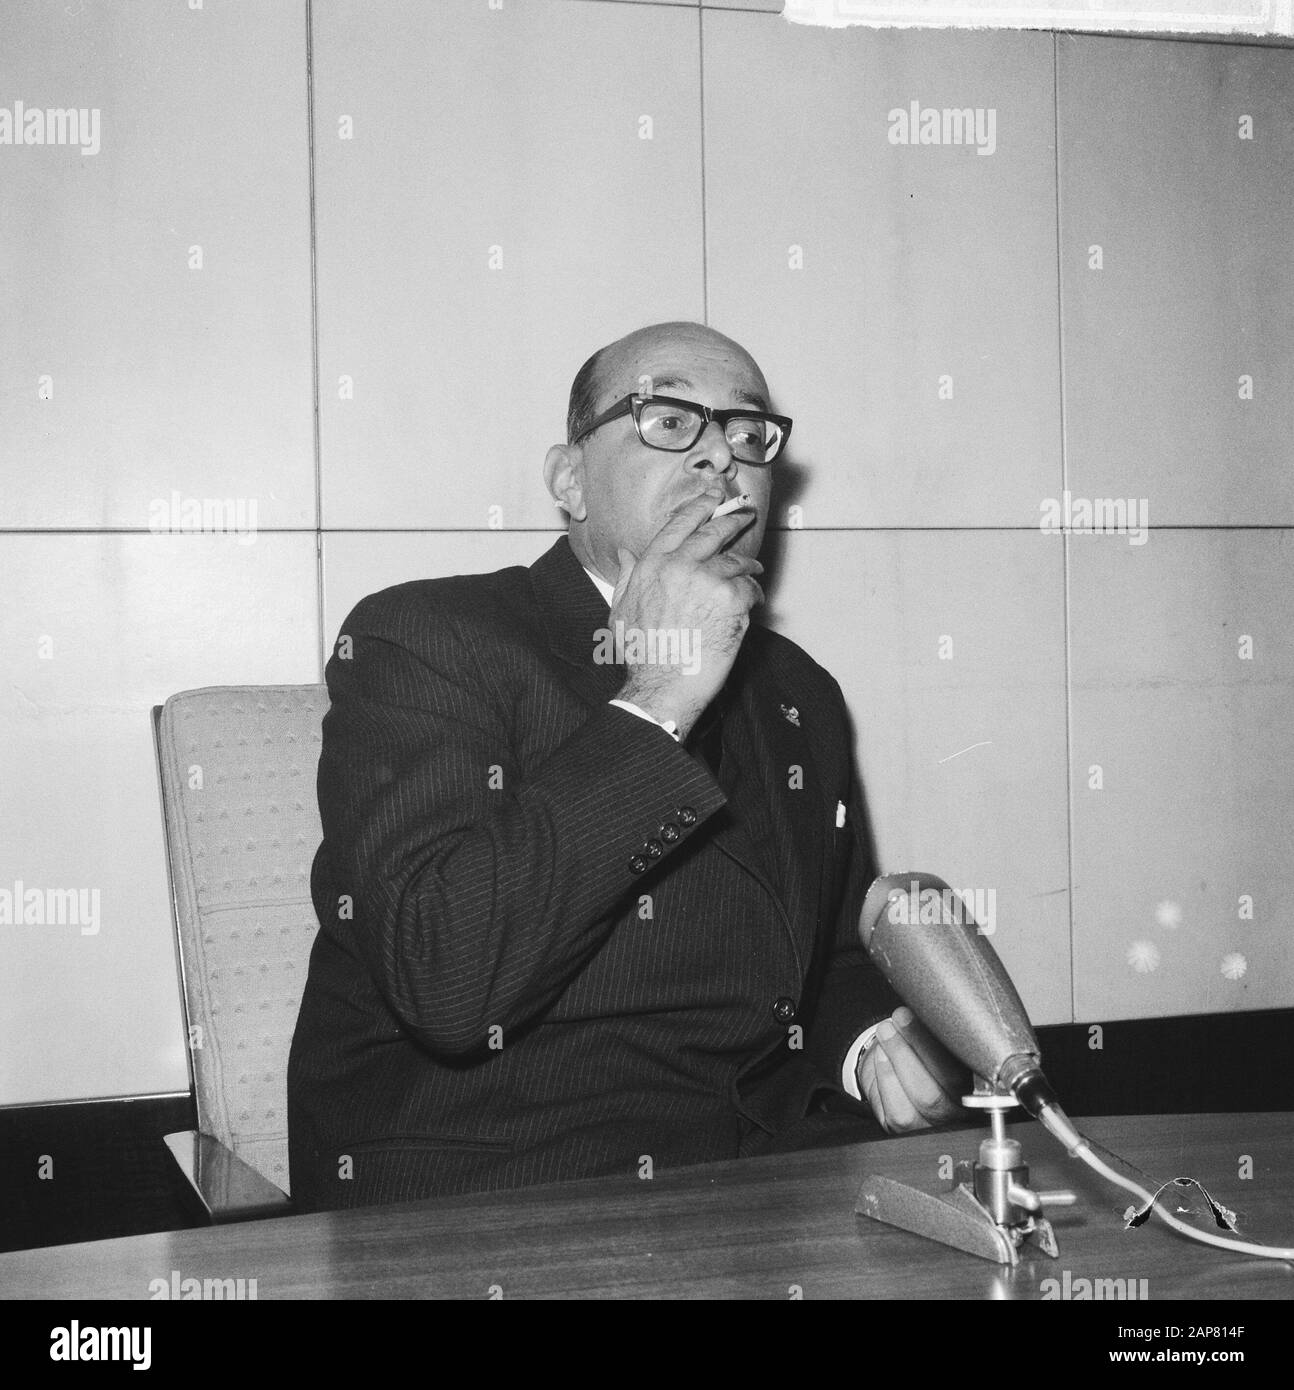 Arrival of mr. De Vries, the newly appointed governor of Suriname at Schiphol Airport. He will be sworn in in the Netherlands. Mr. de Vries during press conference Date: 15 February 1965 Location: Noord-Holland, Schiphol Keywords: arrivals, governors, overseas territories, press conferences Stock Photo